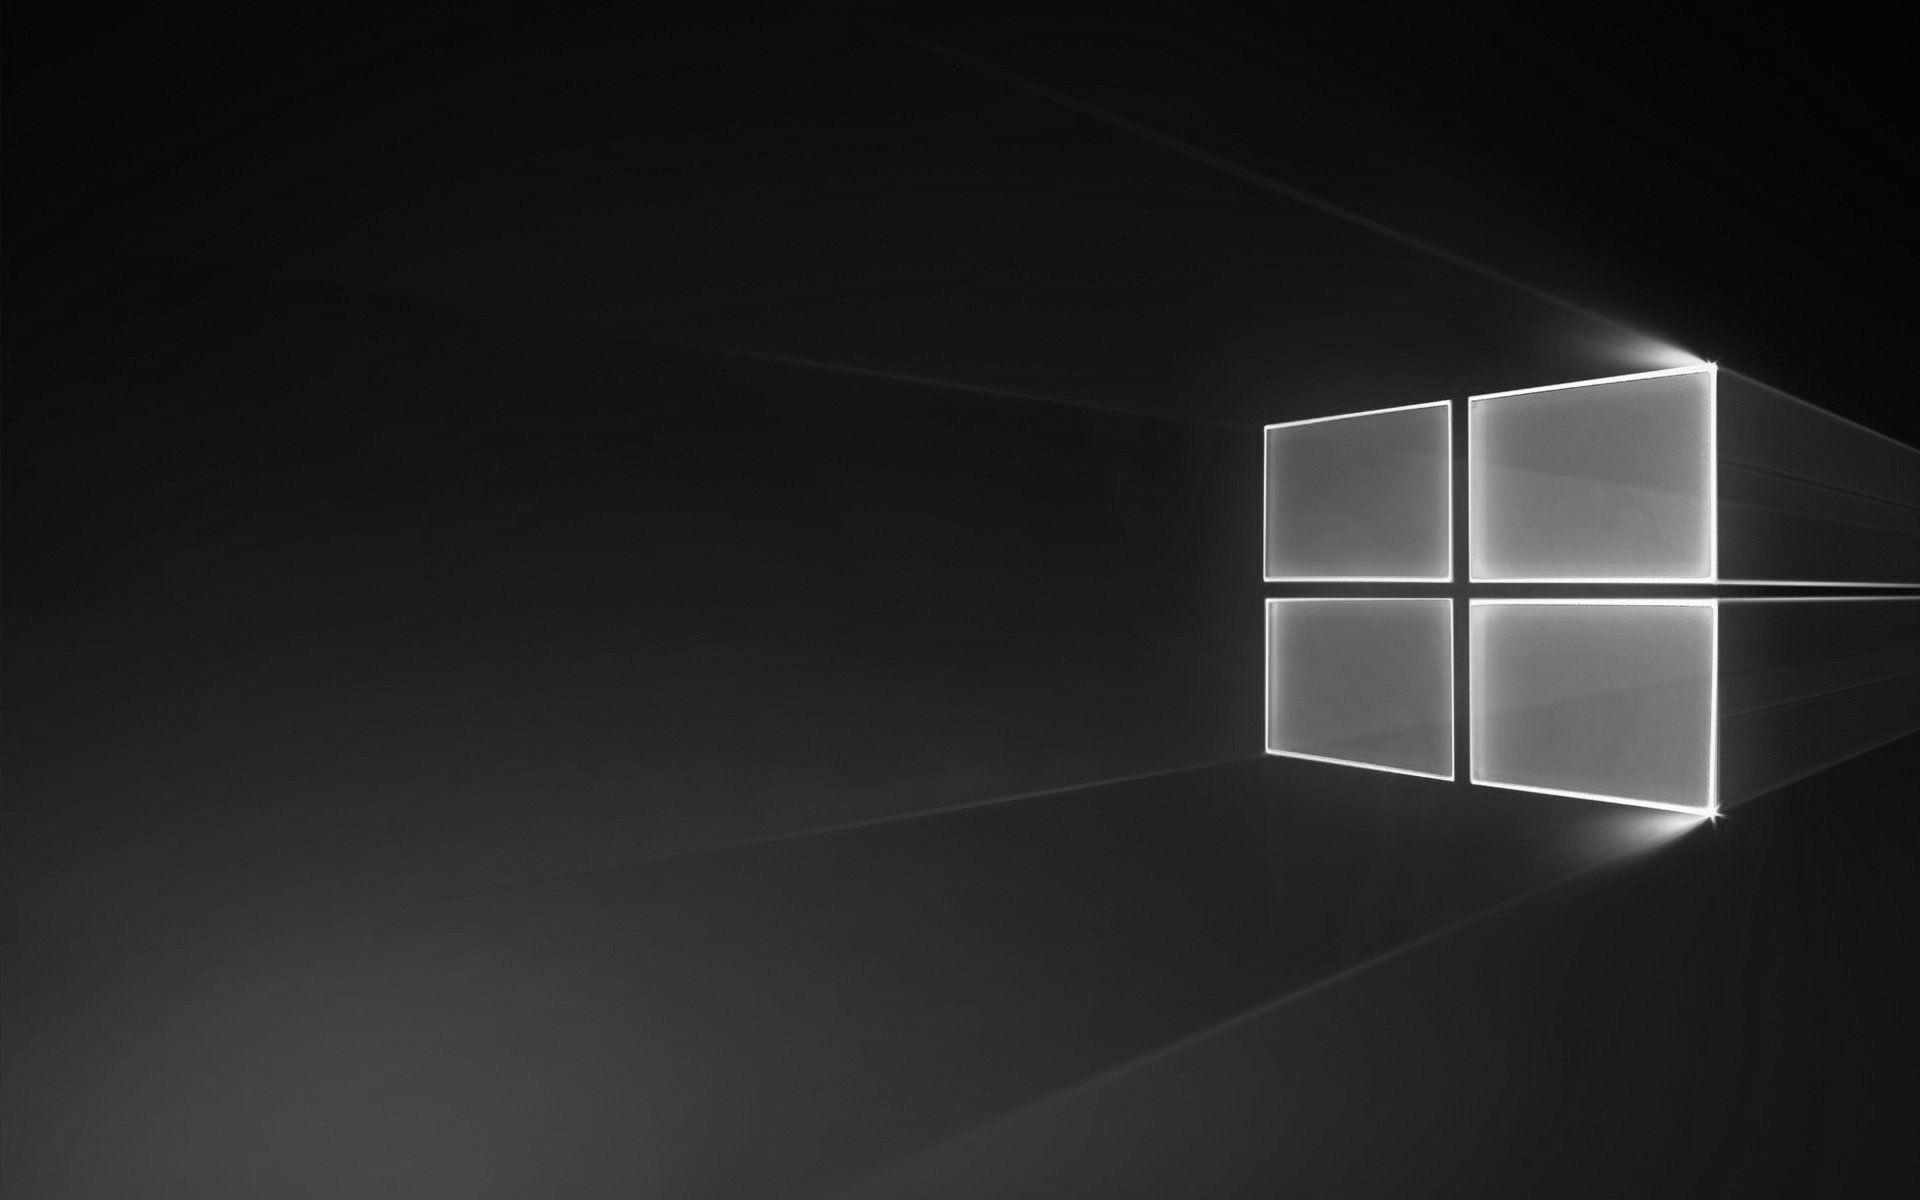 White Windows 10 Wallpapers Top Free White Windows 10 Backgrounds